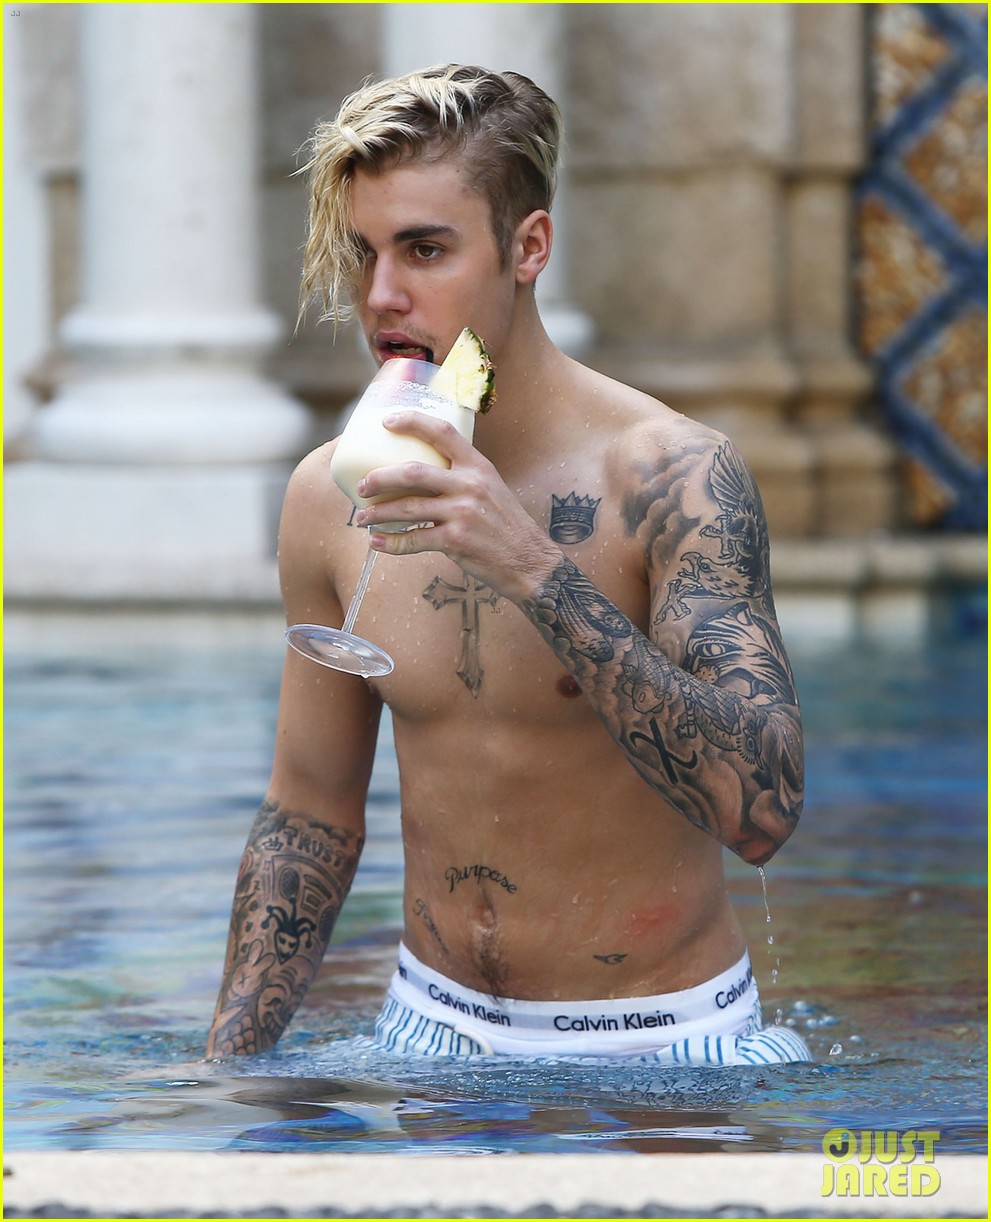 Justin Bieber Goes Shirtless for a Swim at the Versace Mansion: Photo #3528...